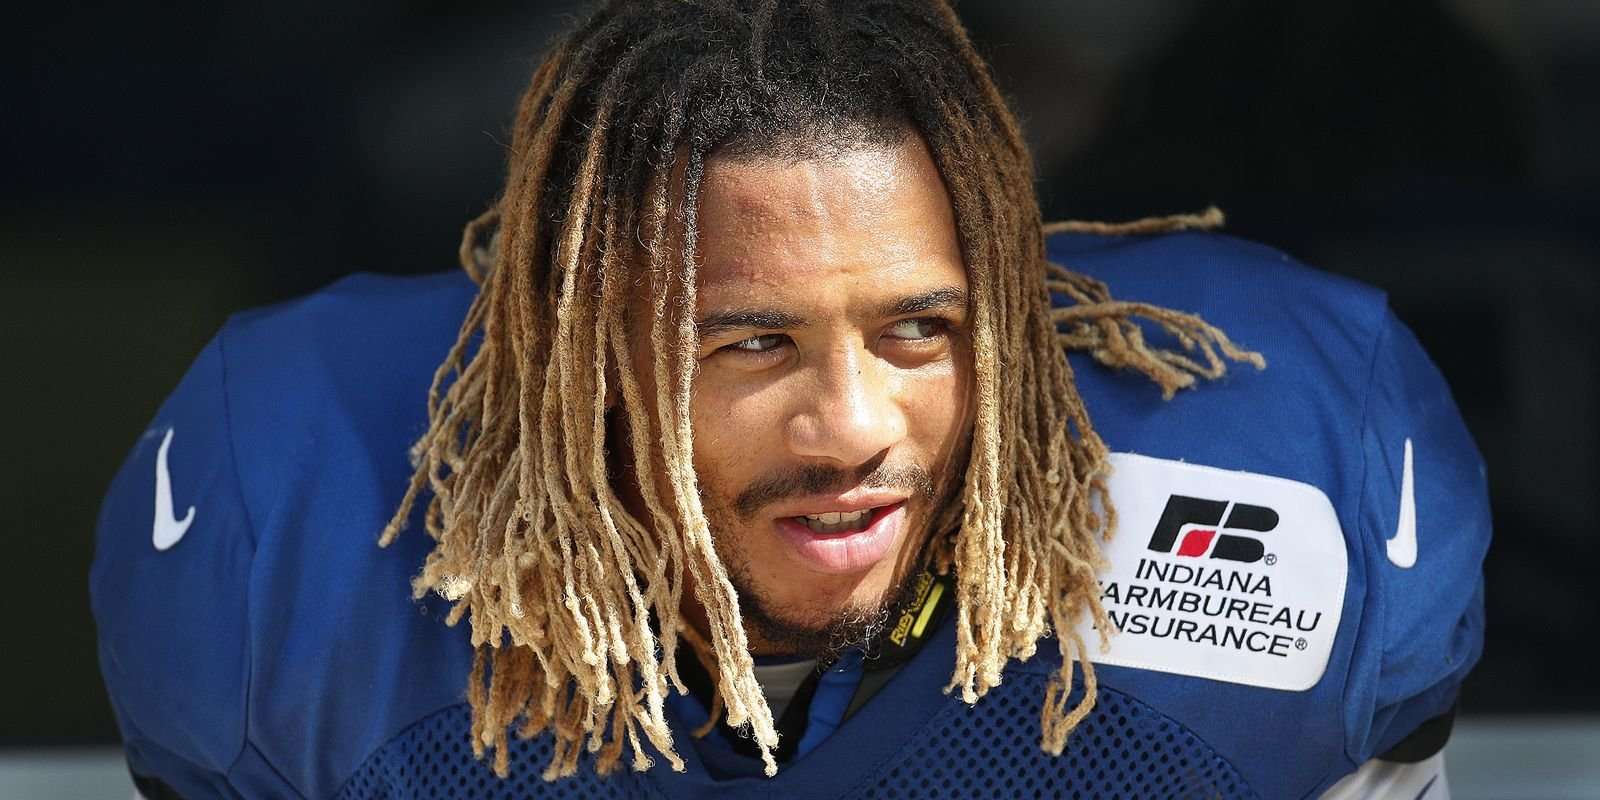 image for Colts player Edwin Jackson, Avon man killed by suspected drunken driver on I-70